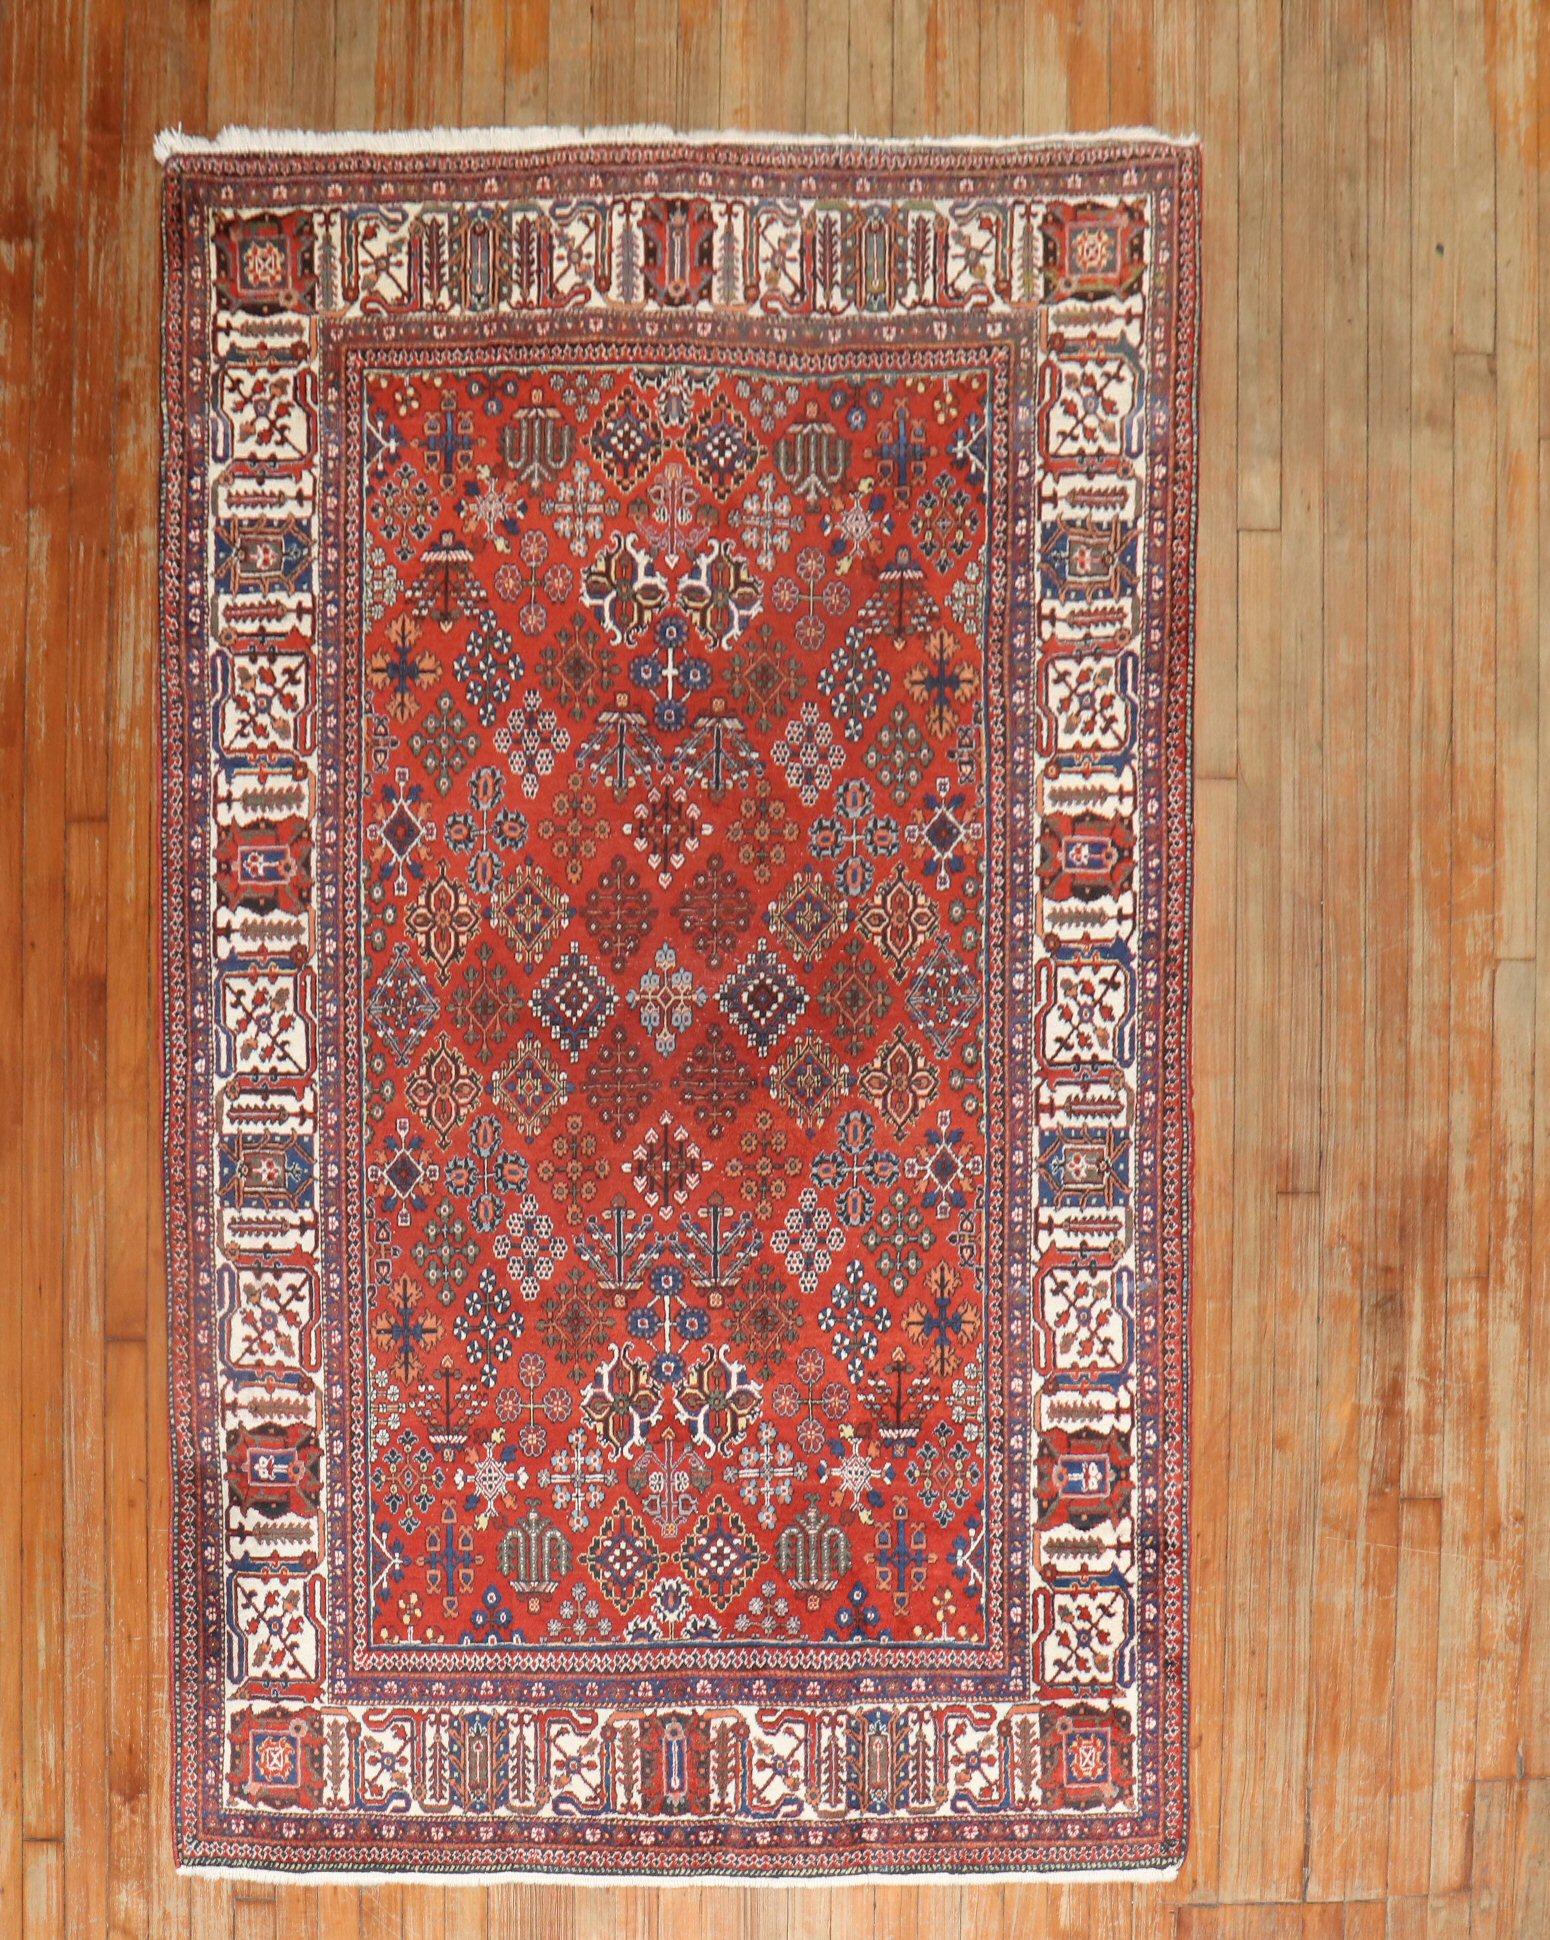 An early 20th century Persian Joshegan carpet.

Measures: 4'6'' x 7'2''

The town of Josheghan is located 140 kilometers north of Isfahan. This small city is important in the history of carpet weaving in Iran and has gained fame for its old